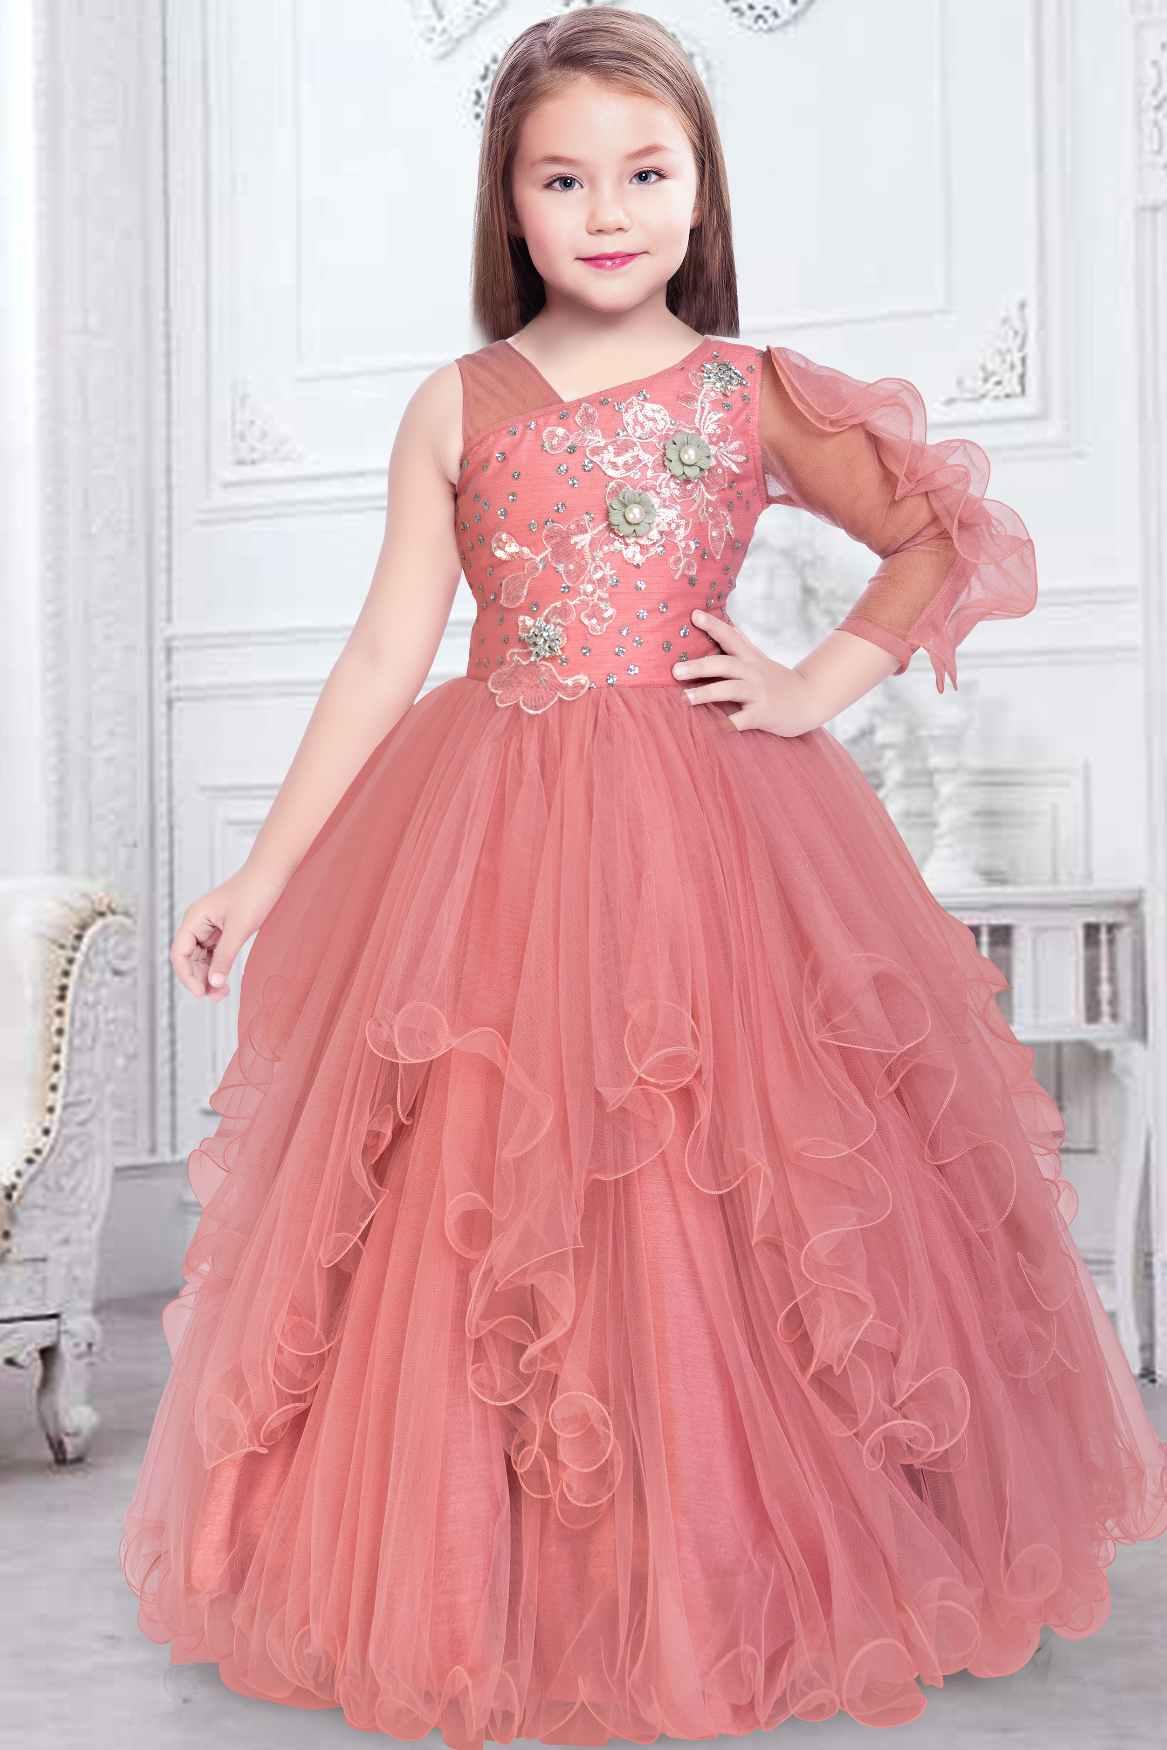 Designer One Side Ruffled Sleeve Peach Gown With Floral Embroidery For Girls - Lagorii Kids